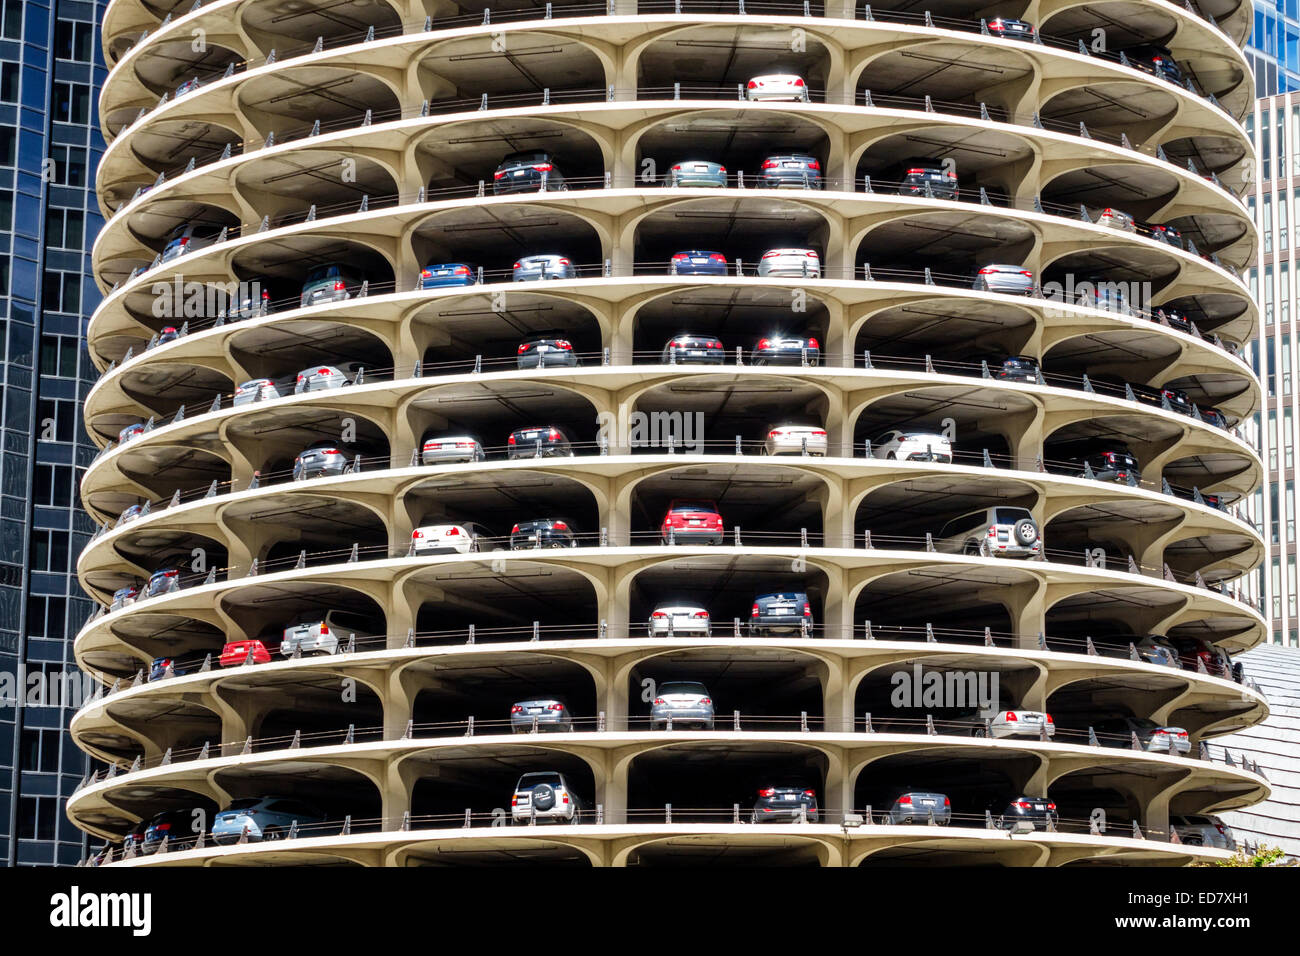 The Honeycomb Parking Garage Building in Downtown Chicago. Stock Photo -  Image of chicago, juxtaposition: 94618334